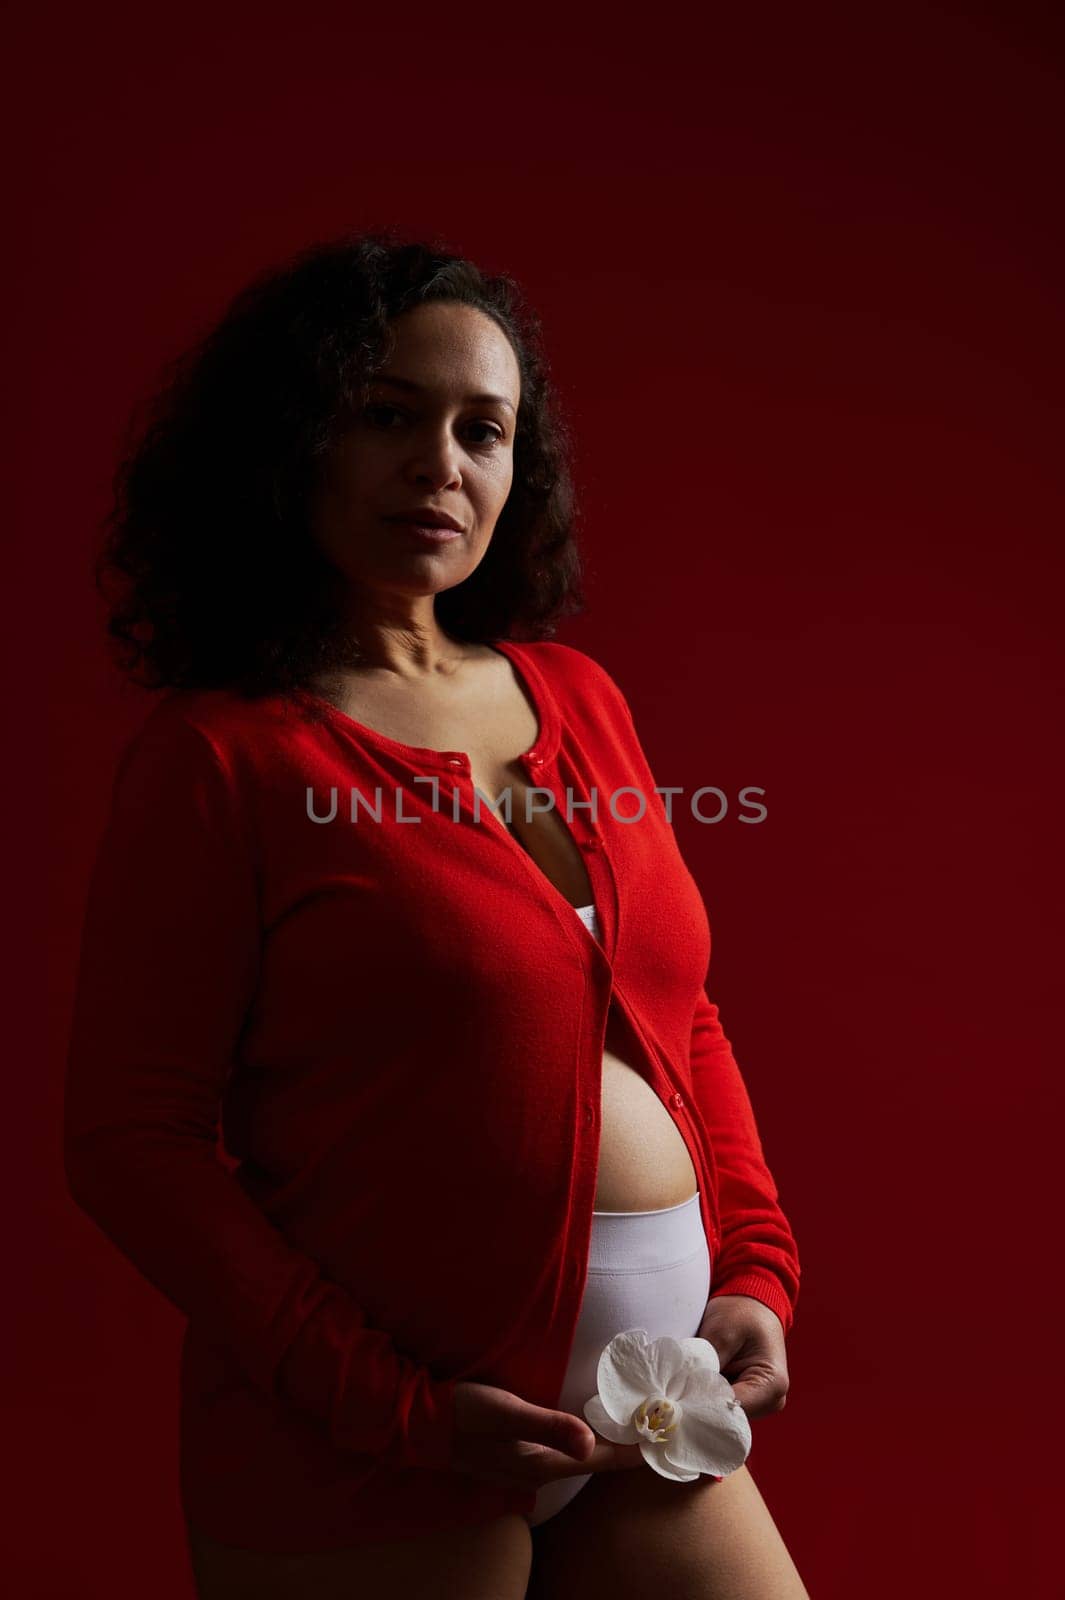 Confident portrait of ethnic pregnant woman, authentic expectant mother wearing red unbuttoned shirt, holding white orchid flower, looking at camera, posing bare belly on dark red isolated background